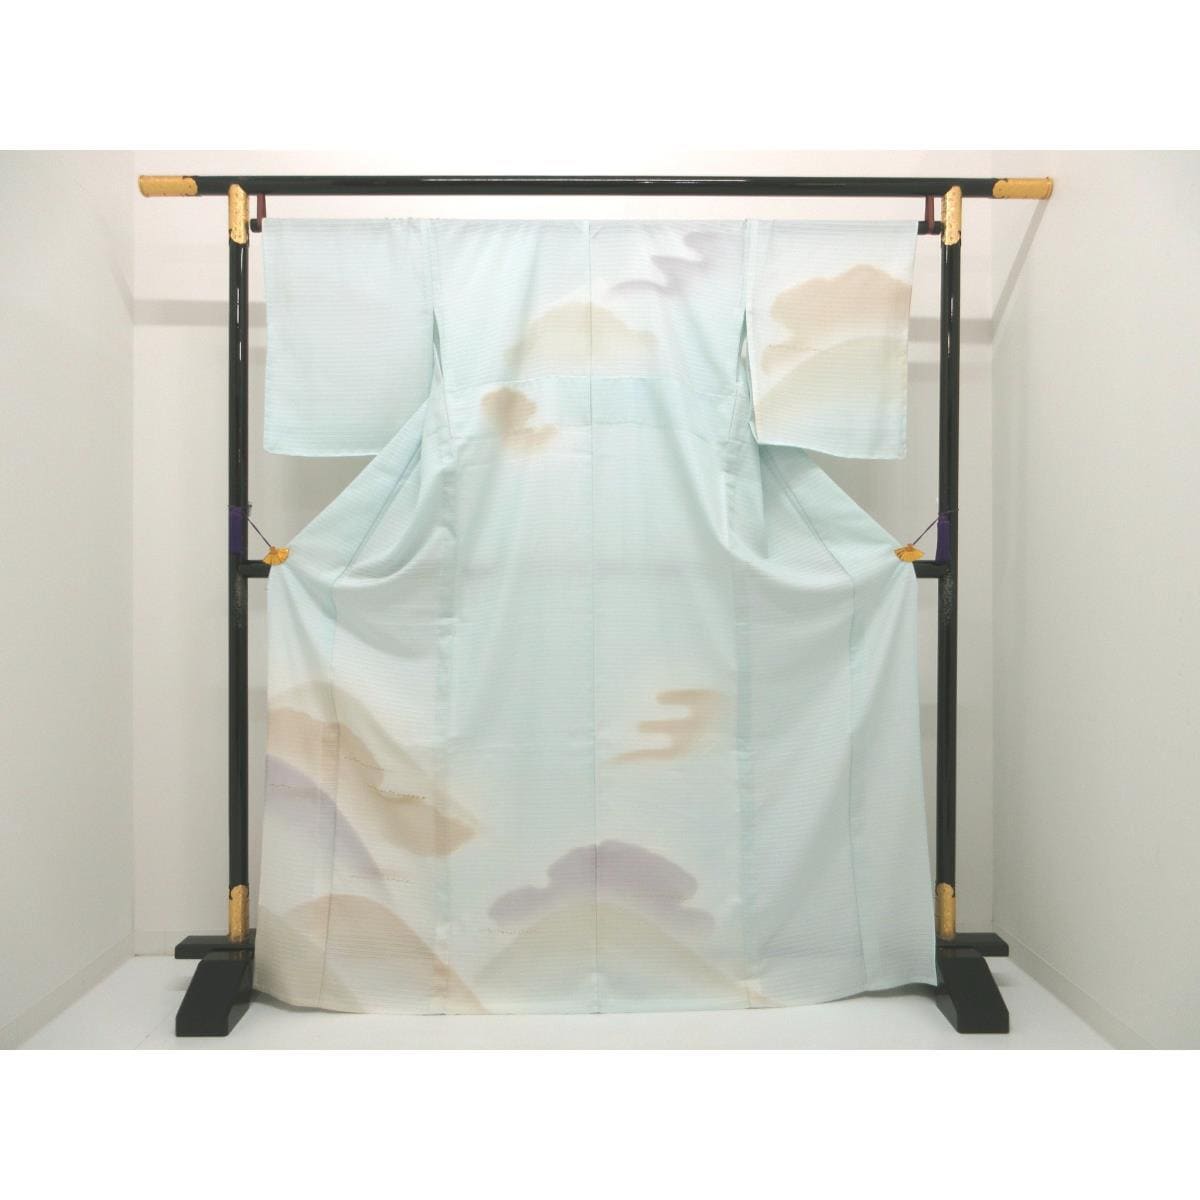 [BRAND NEW] Single layer visiting kimono with gold leaf finish and gradation dyeing